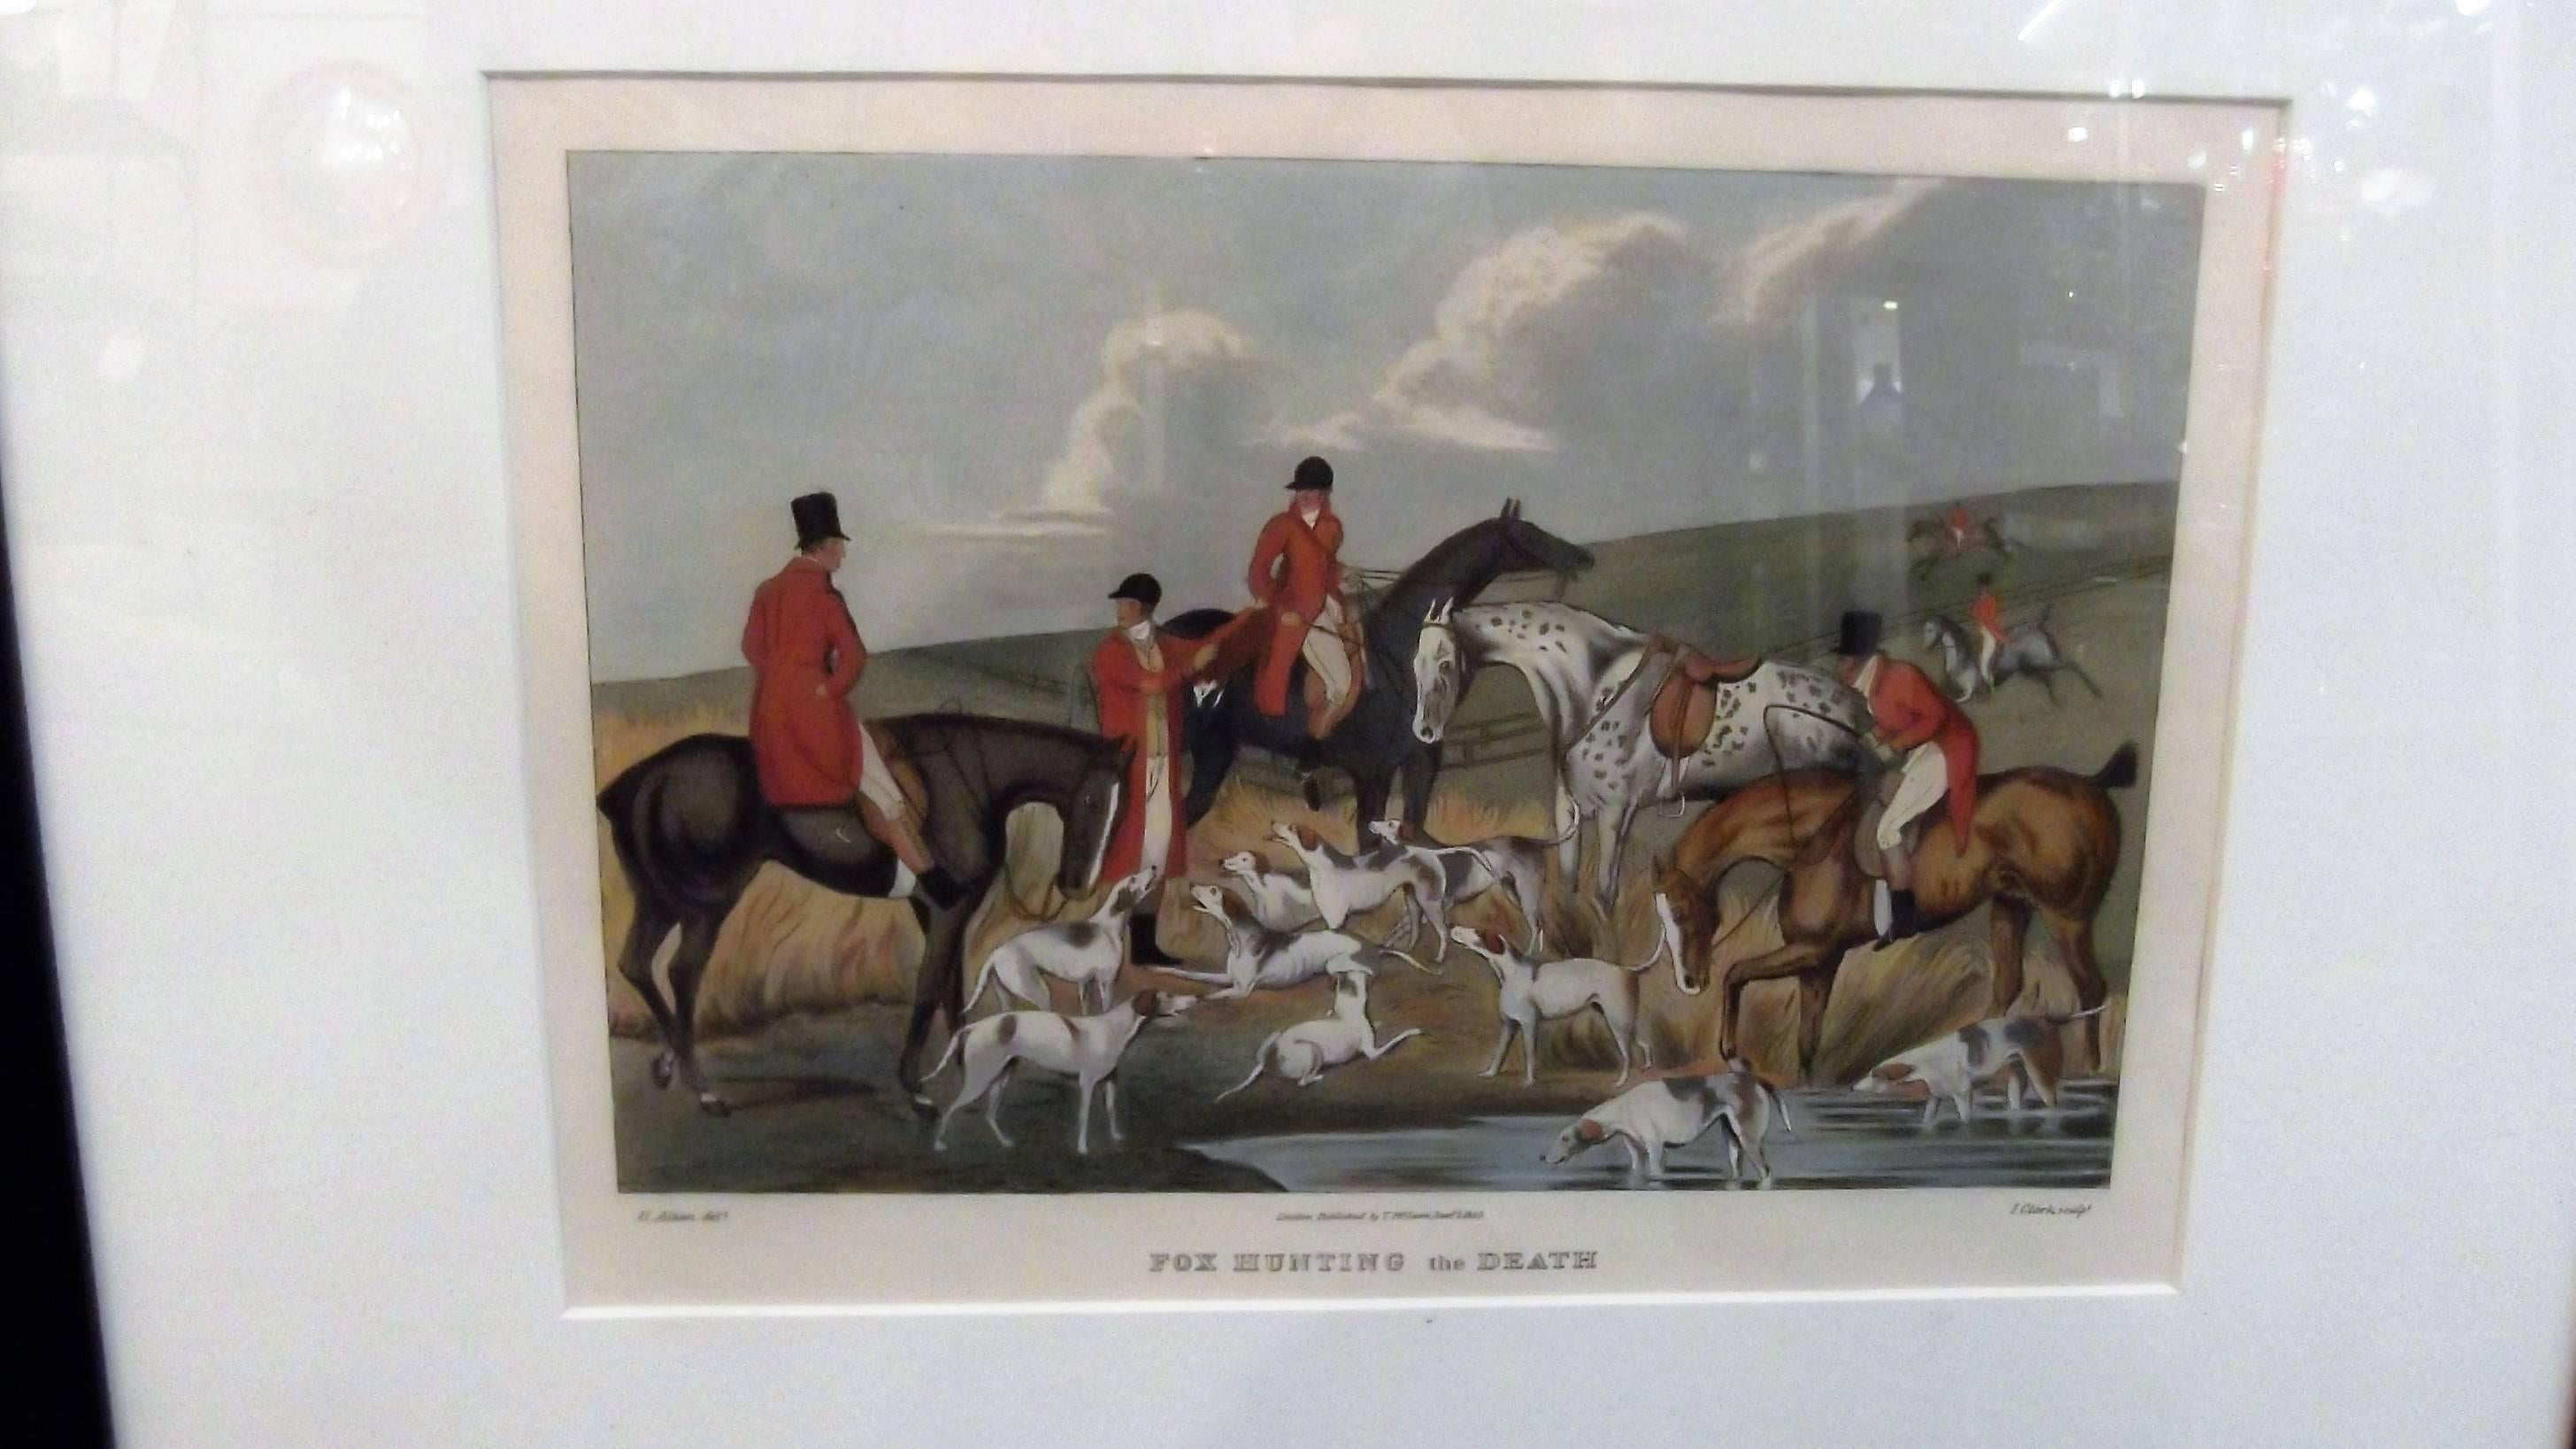 A pair of hand colored fox hunt engravings in ebonized frames by Henry Alken printed in 1820.
 Henry Alken was a keen huntsman and painted what he loved best: hunting and coaching scenes. The most famous of the Alken family of painters, Henry was